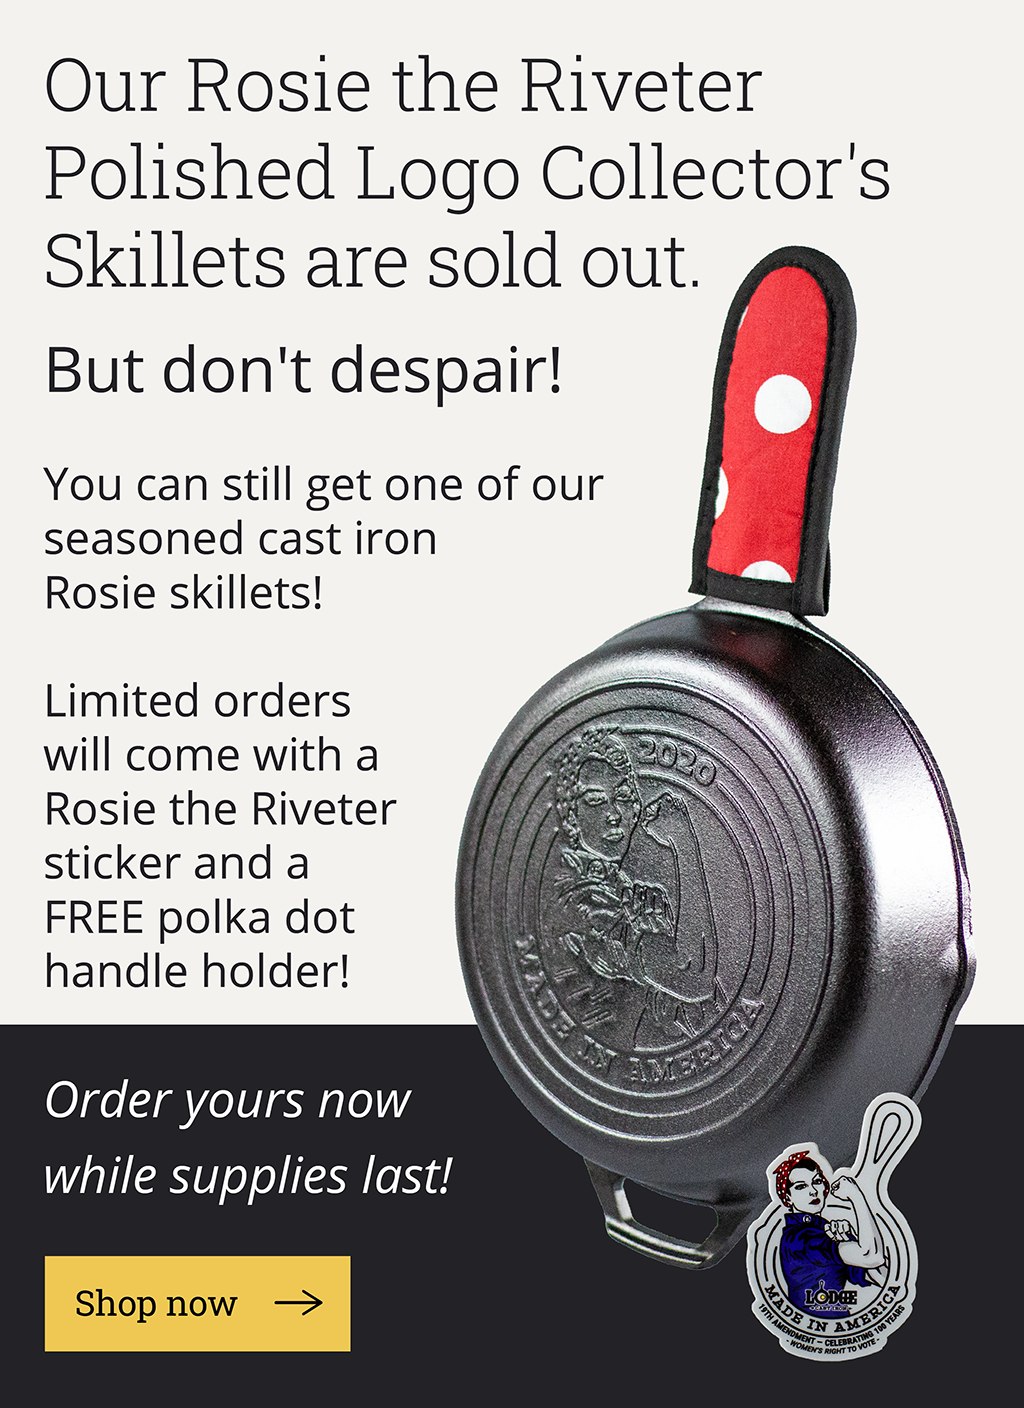  Our Rosie the Riveter Polished Logo Collector''s Skillets are sold out. But don''t despair! You can still get one of our seasoned cast iron Rosie skillets!  Limited orders come with a Rosie the Riveter sticker and a FREE polka dot handle holder!  Order yours now while supplies last!  [Shop now-->]